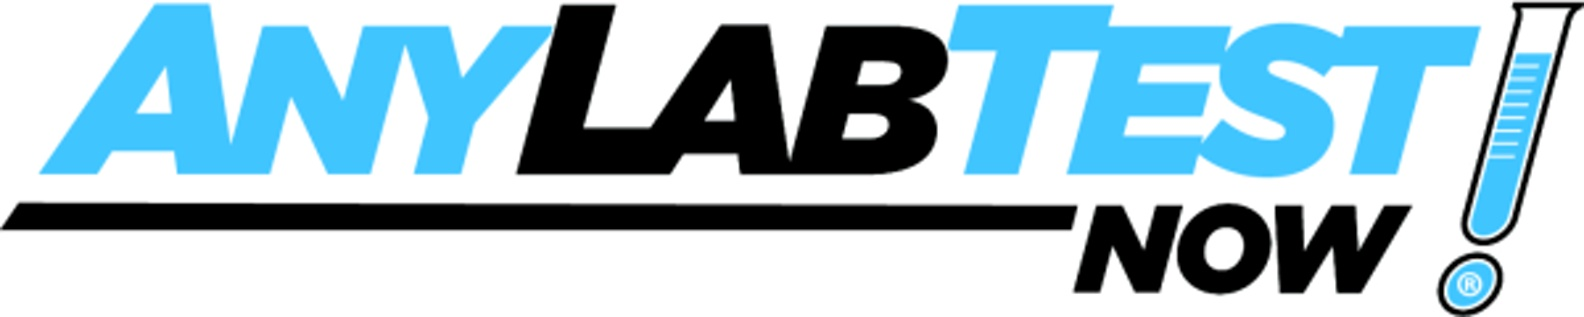 Any Lab Test Now - Galleria Logo